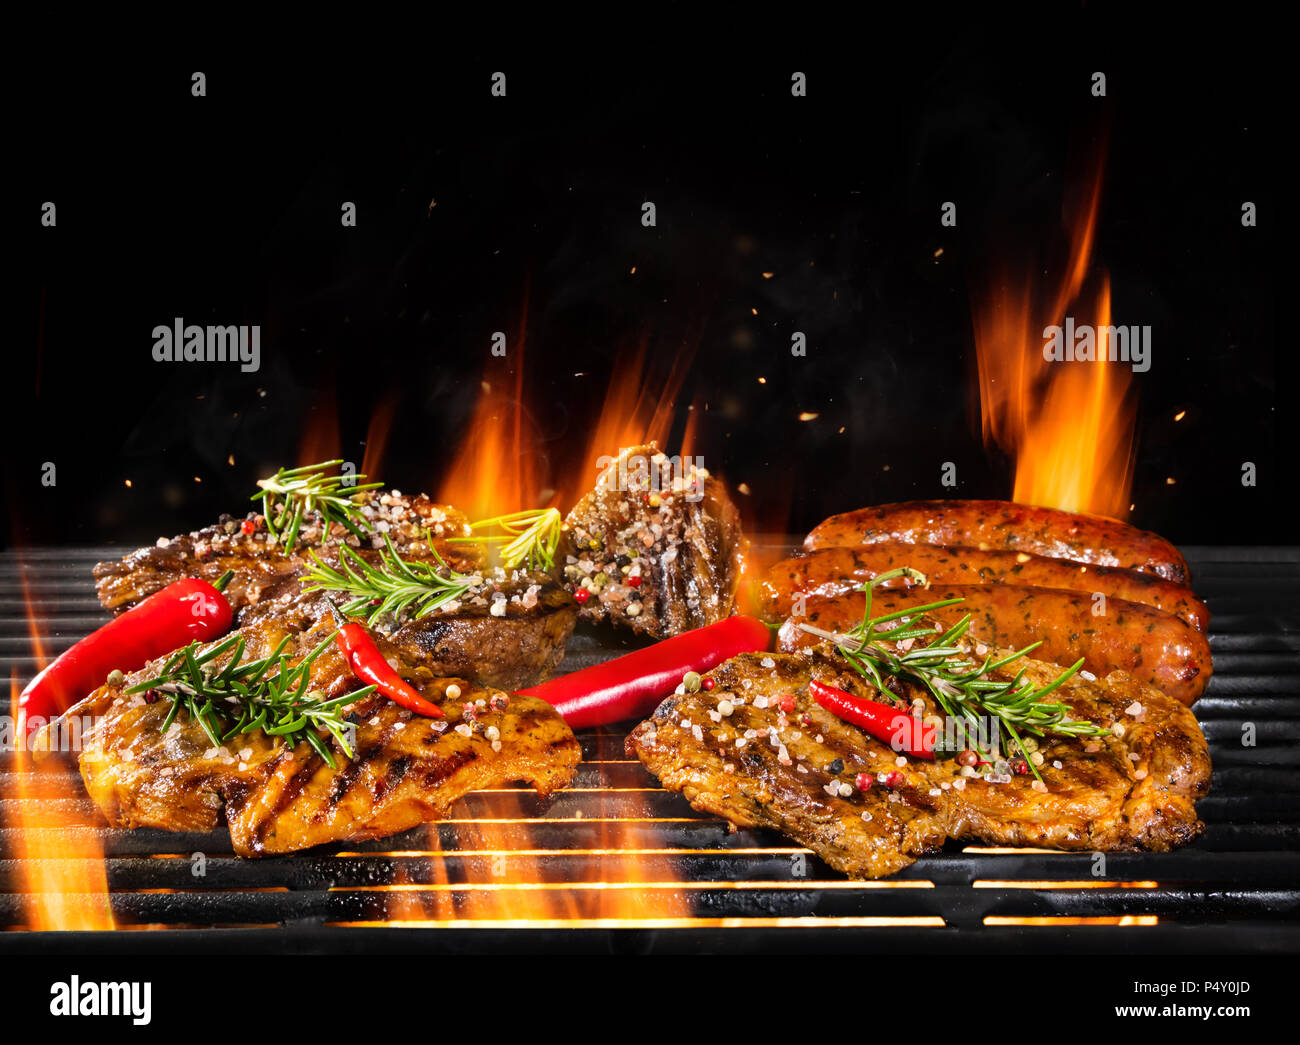 Delicious pieces of meat on grill with Fire flames. Isolated on black  background. Barbecue and grilling. Very high resolution image Stock Photo -  Alamy